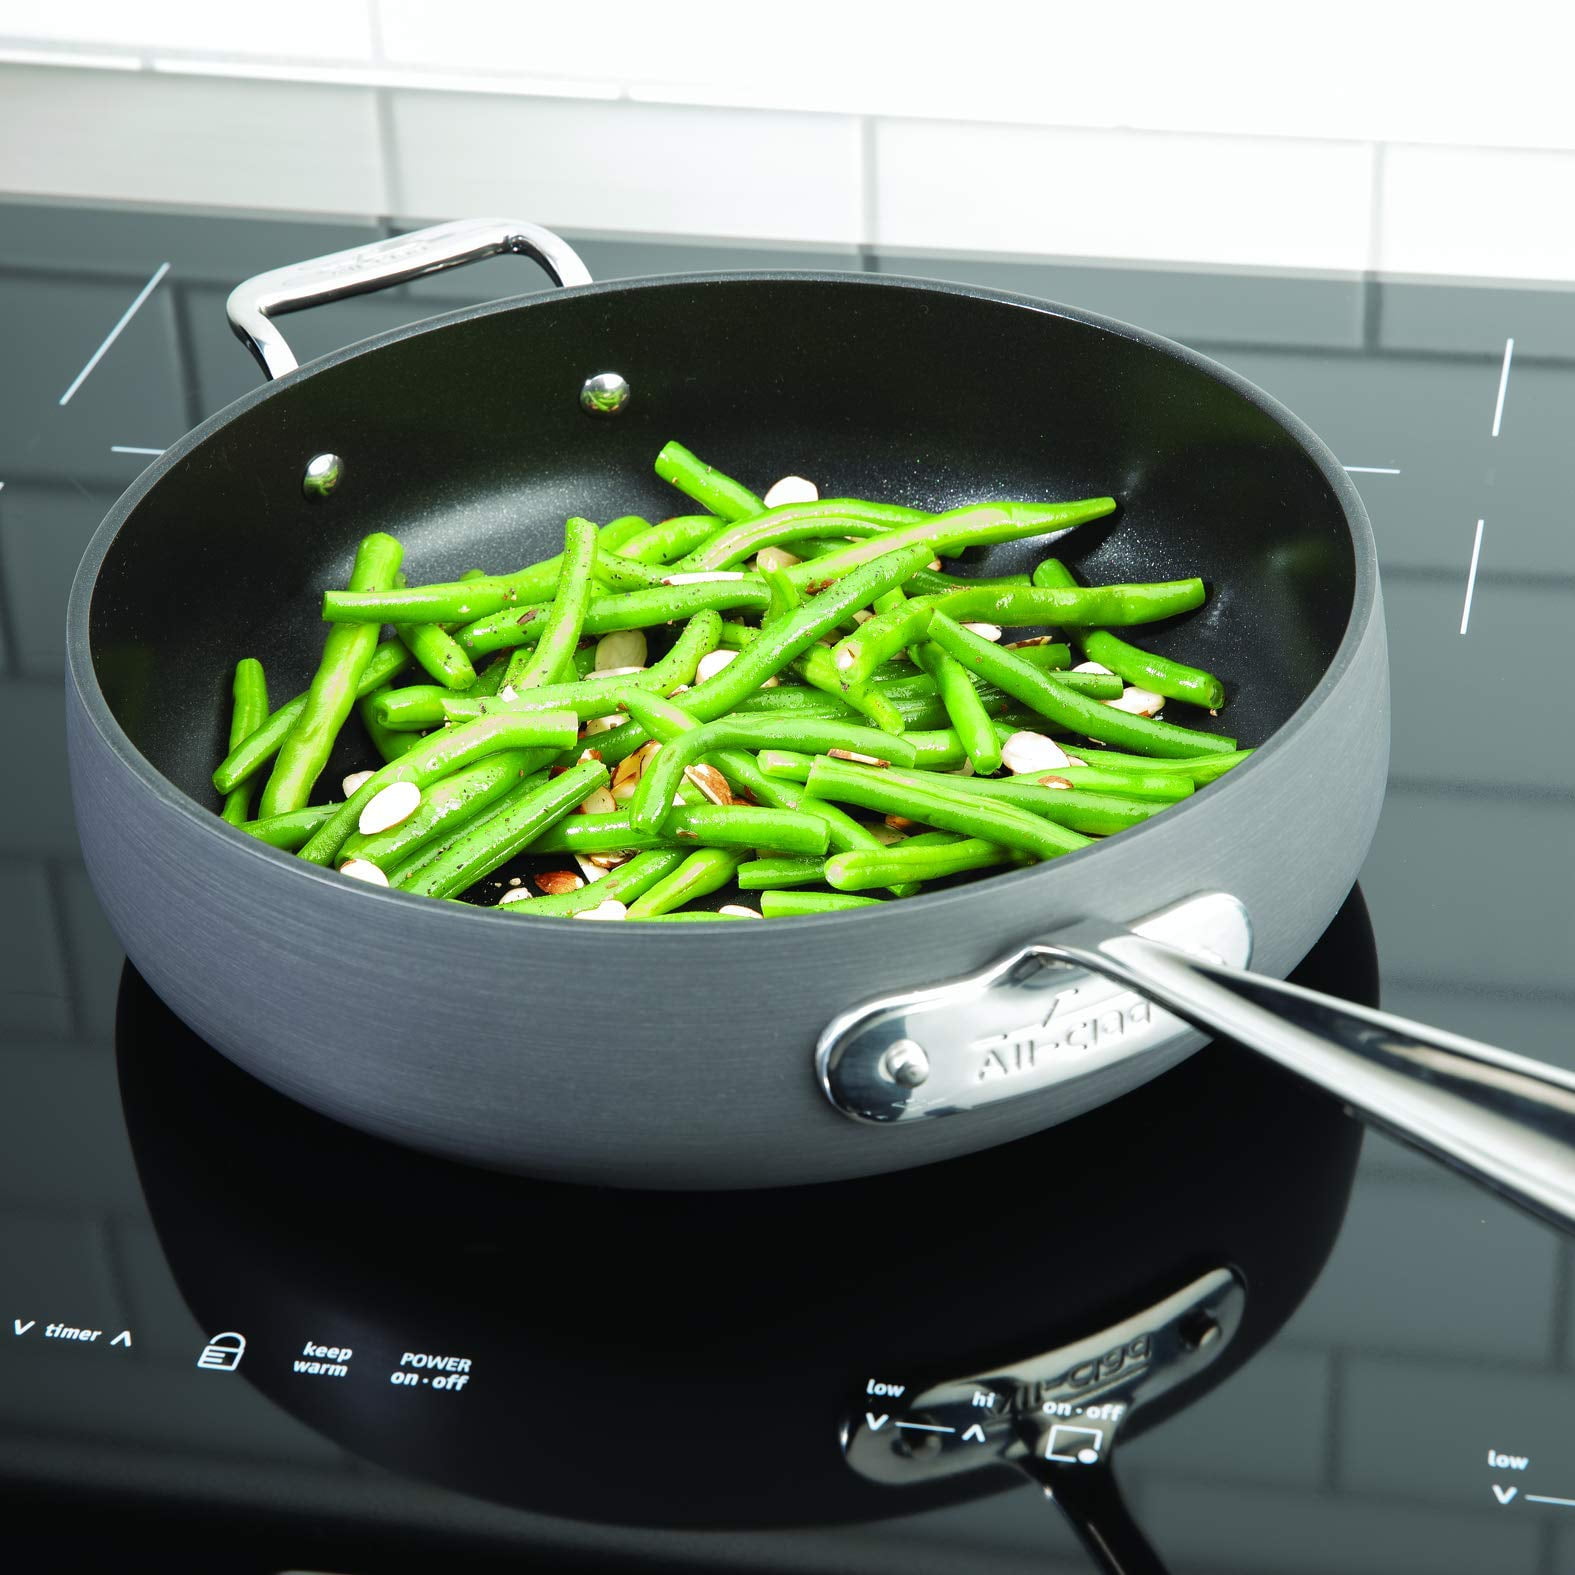 All-Clad HA1 Nonstick Fry Pan Set Review: Great Price